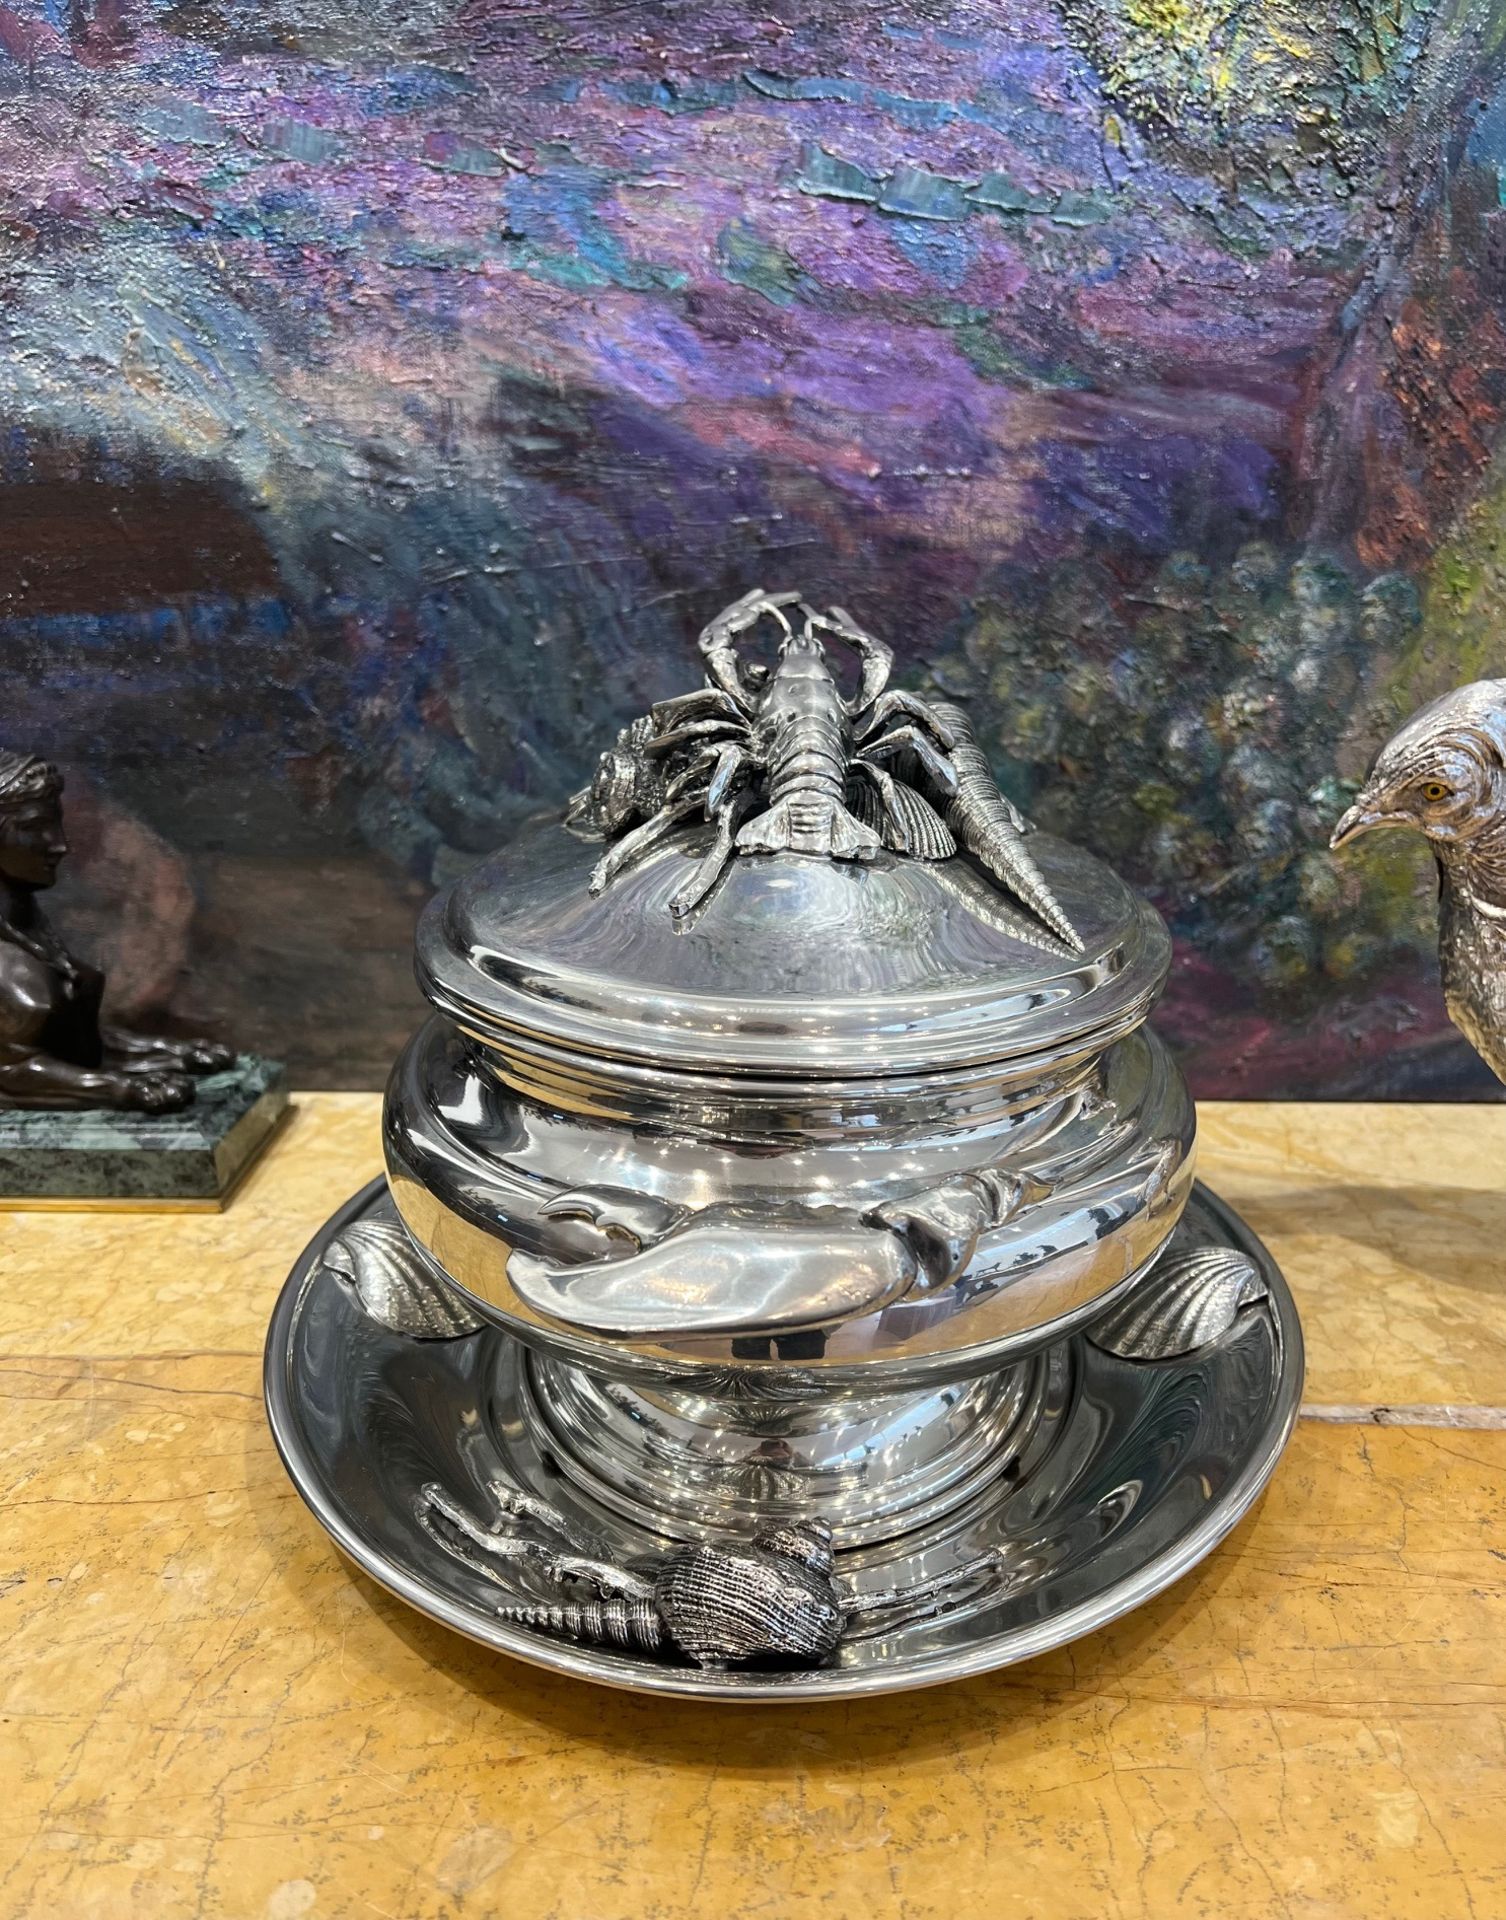 A LARGE ITALIAN SILVER PLATED SOUP TUREEN IN THE STYLE OF BUCCELLATI - Image 2 of 11